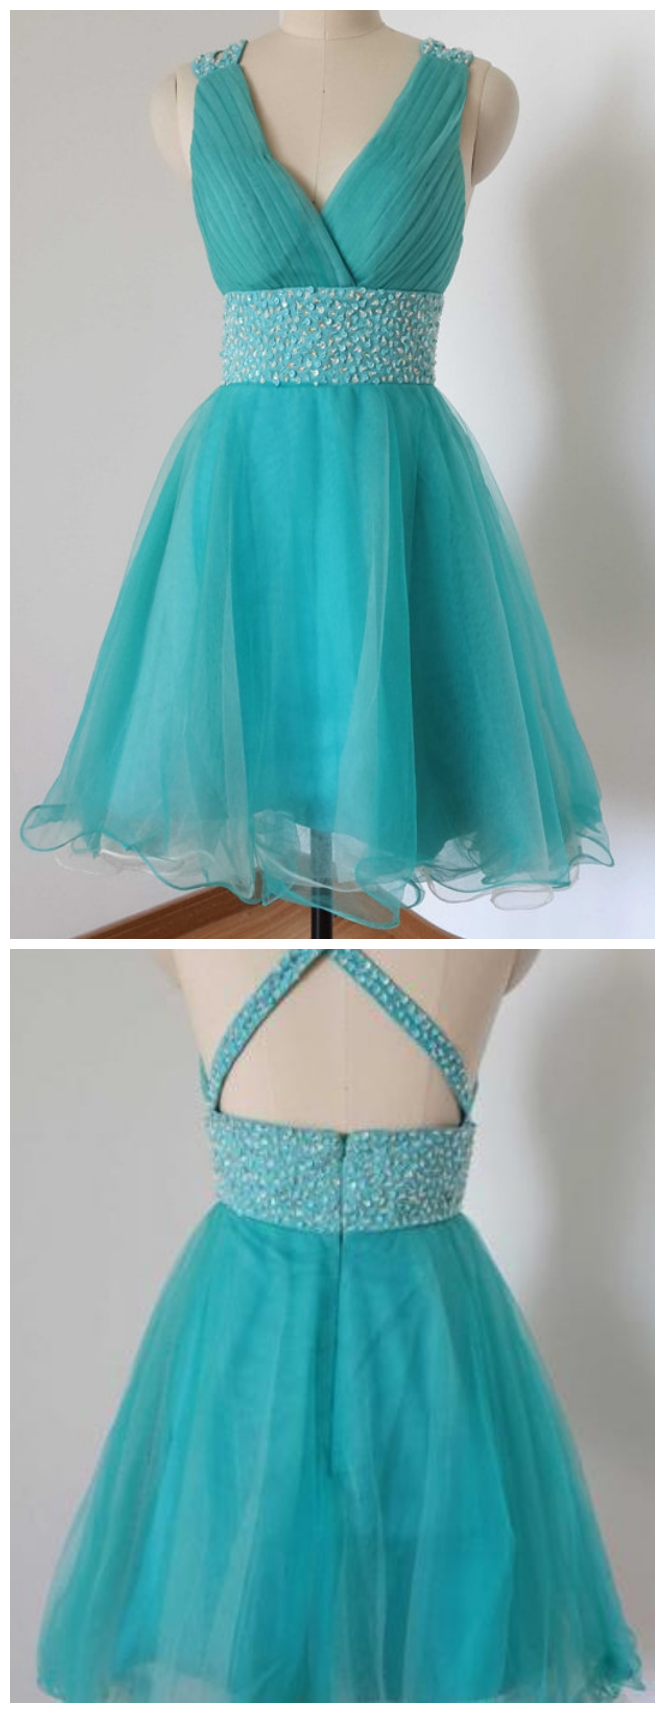 Homecoming Dresses, Graduation Dresses, Mini Party Dress, Homecoming Dresses With Silver Beaded, Short Prom Dresses, Turquoise Prom Dresses,